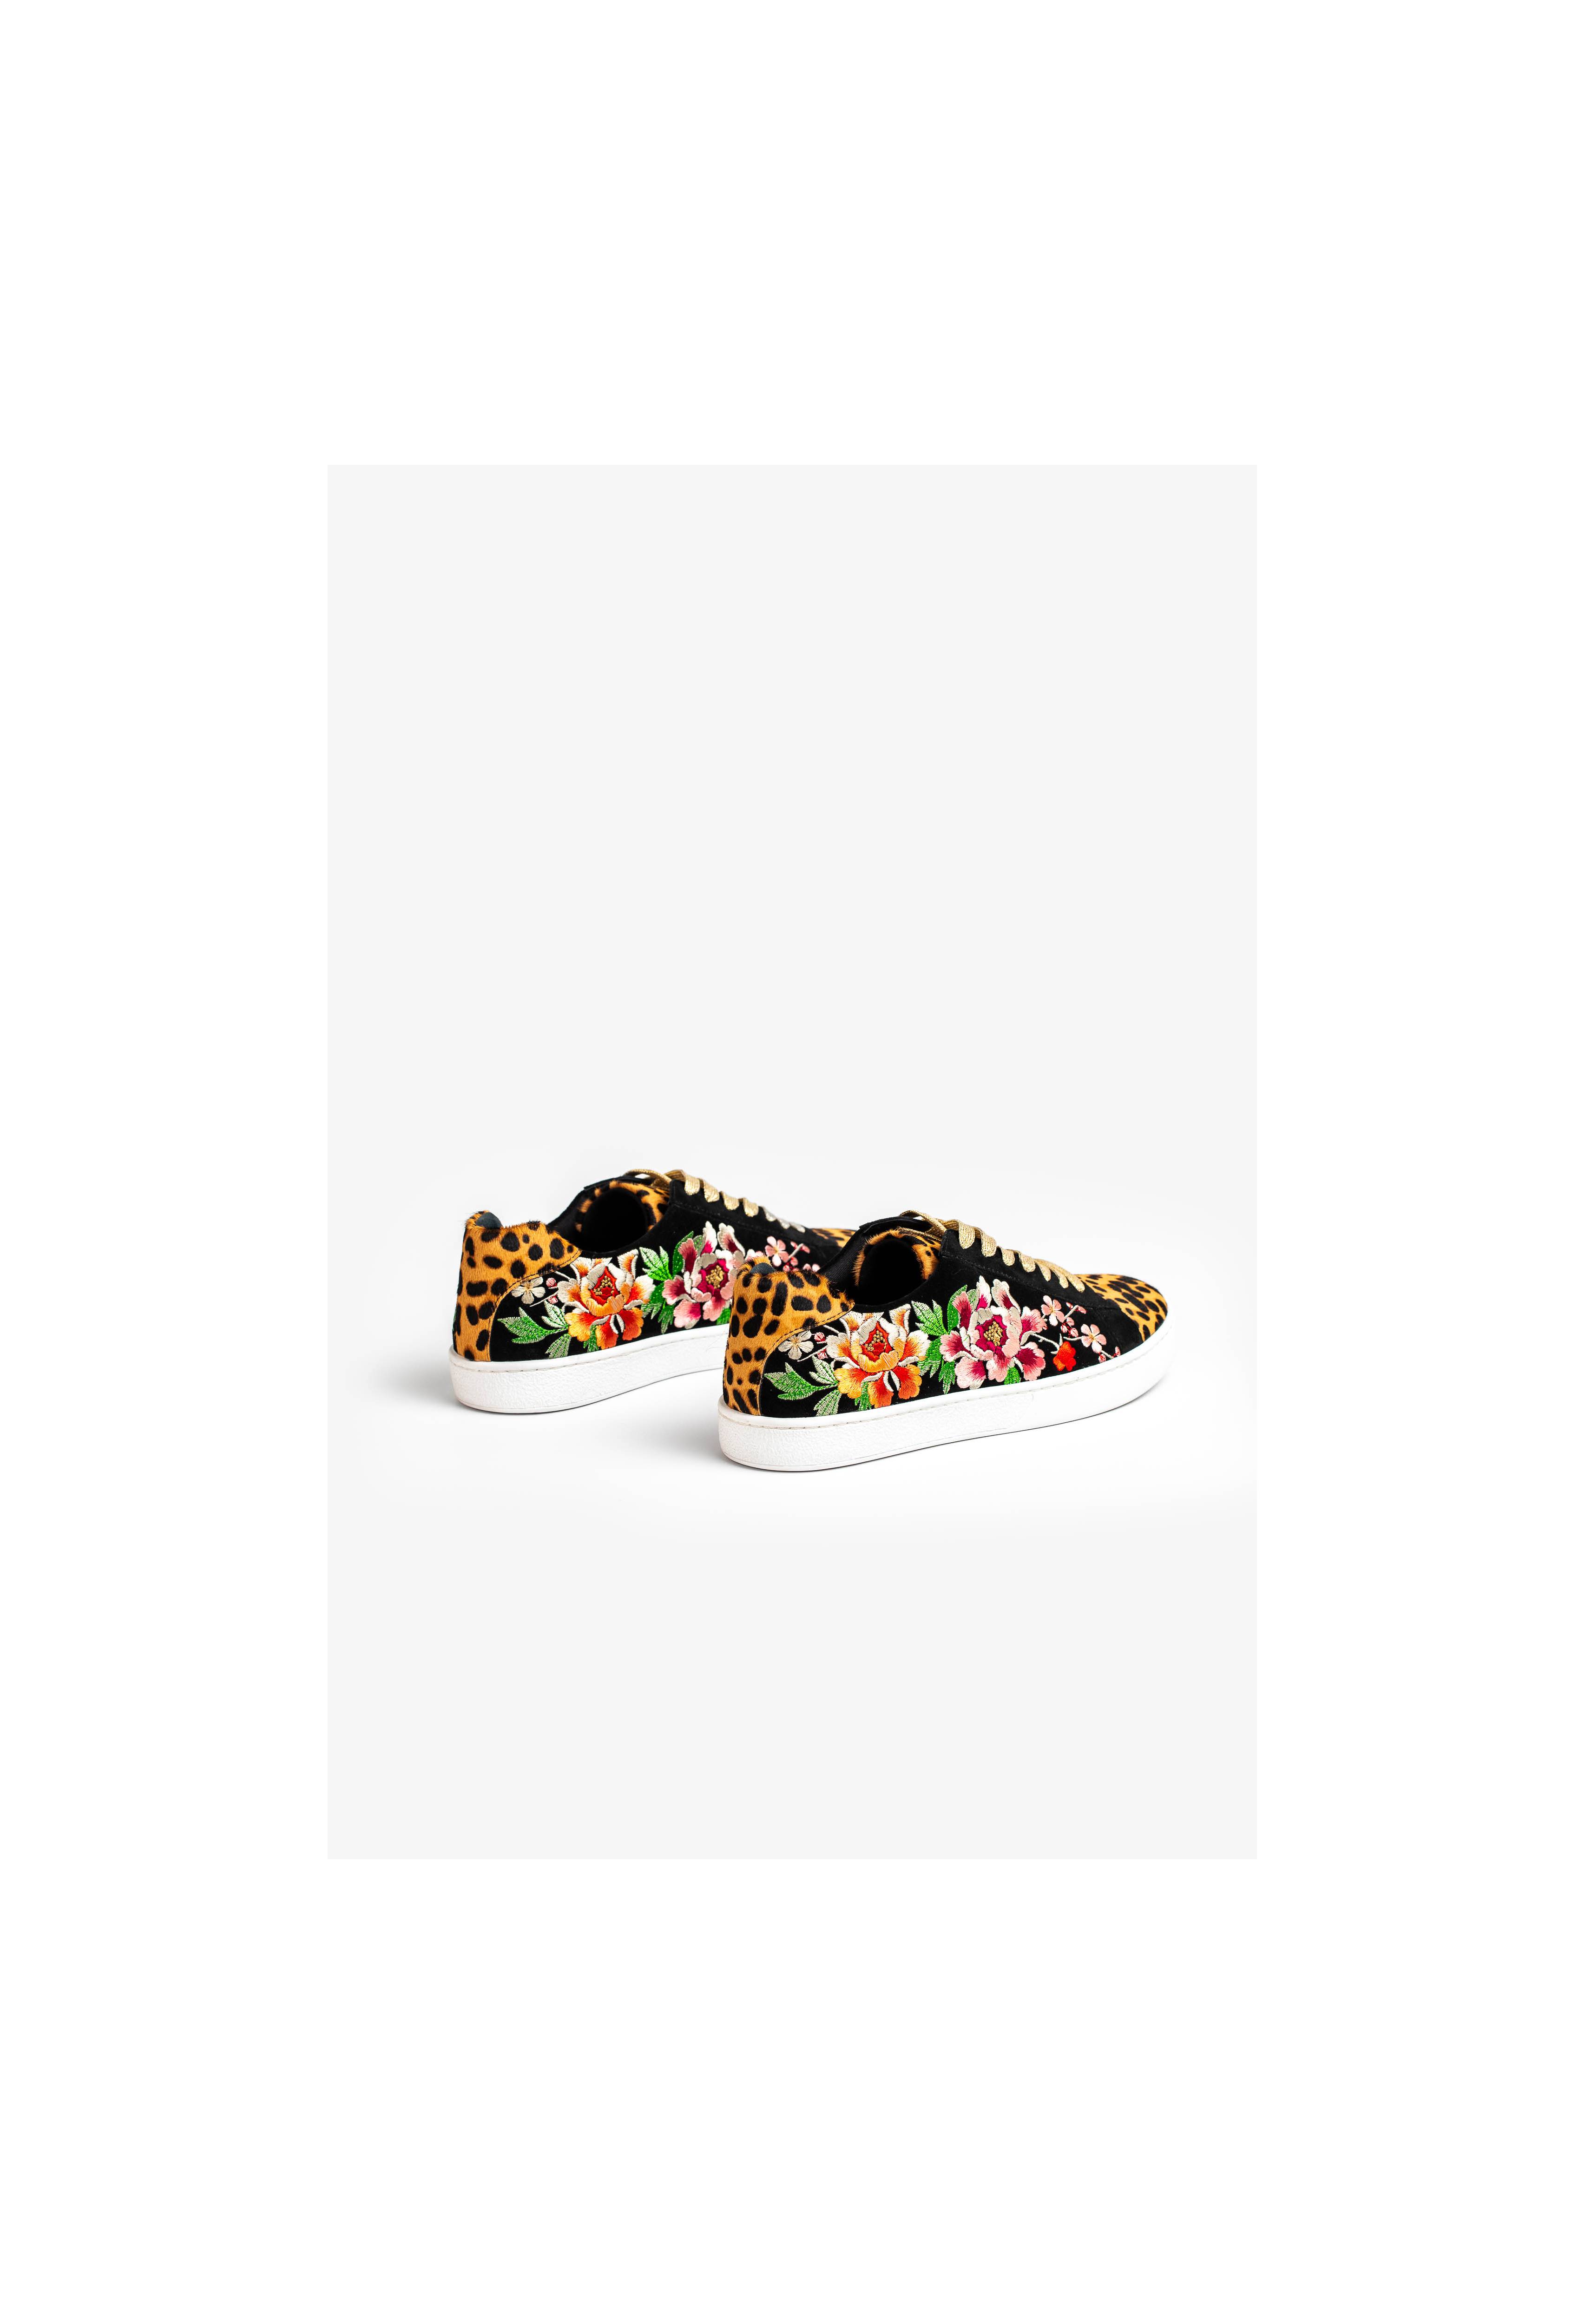 Acacia Leopard Sneaker, , large image number 3